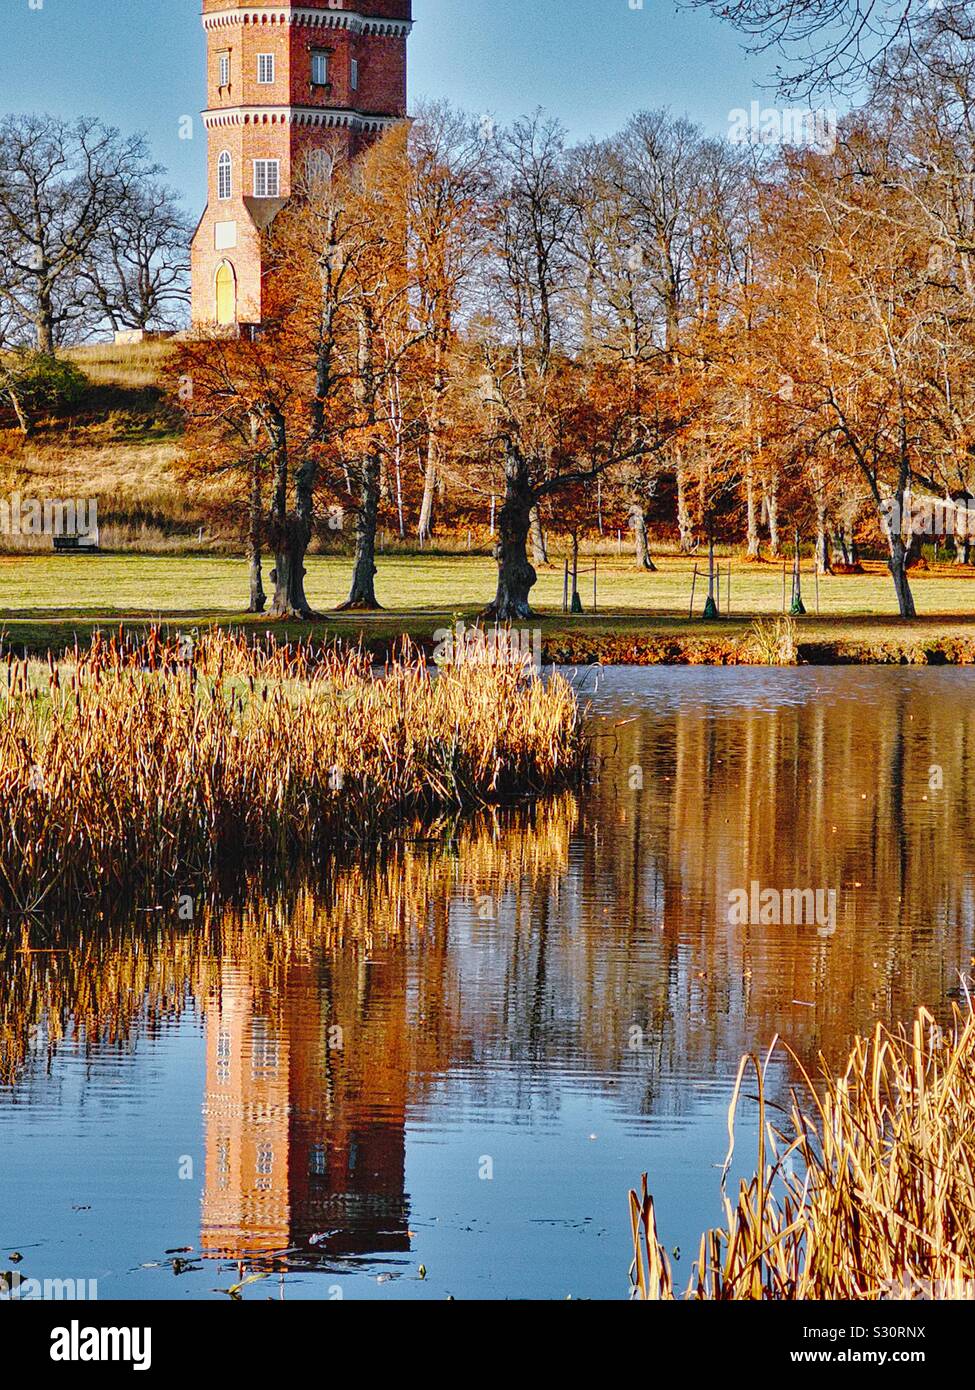 Gothic tower reflected in river, Drottningholm Palace Gardens, Drottningholm, Stockholm County, Sweden. Drottningholm is the private residence of the Swedish Royal family. Gothic tower was built 1792. Stock Photo